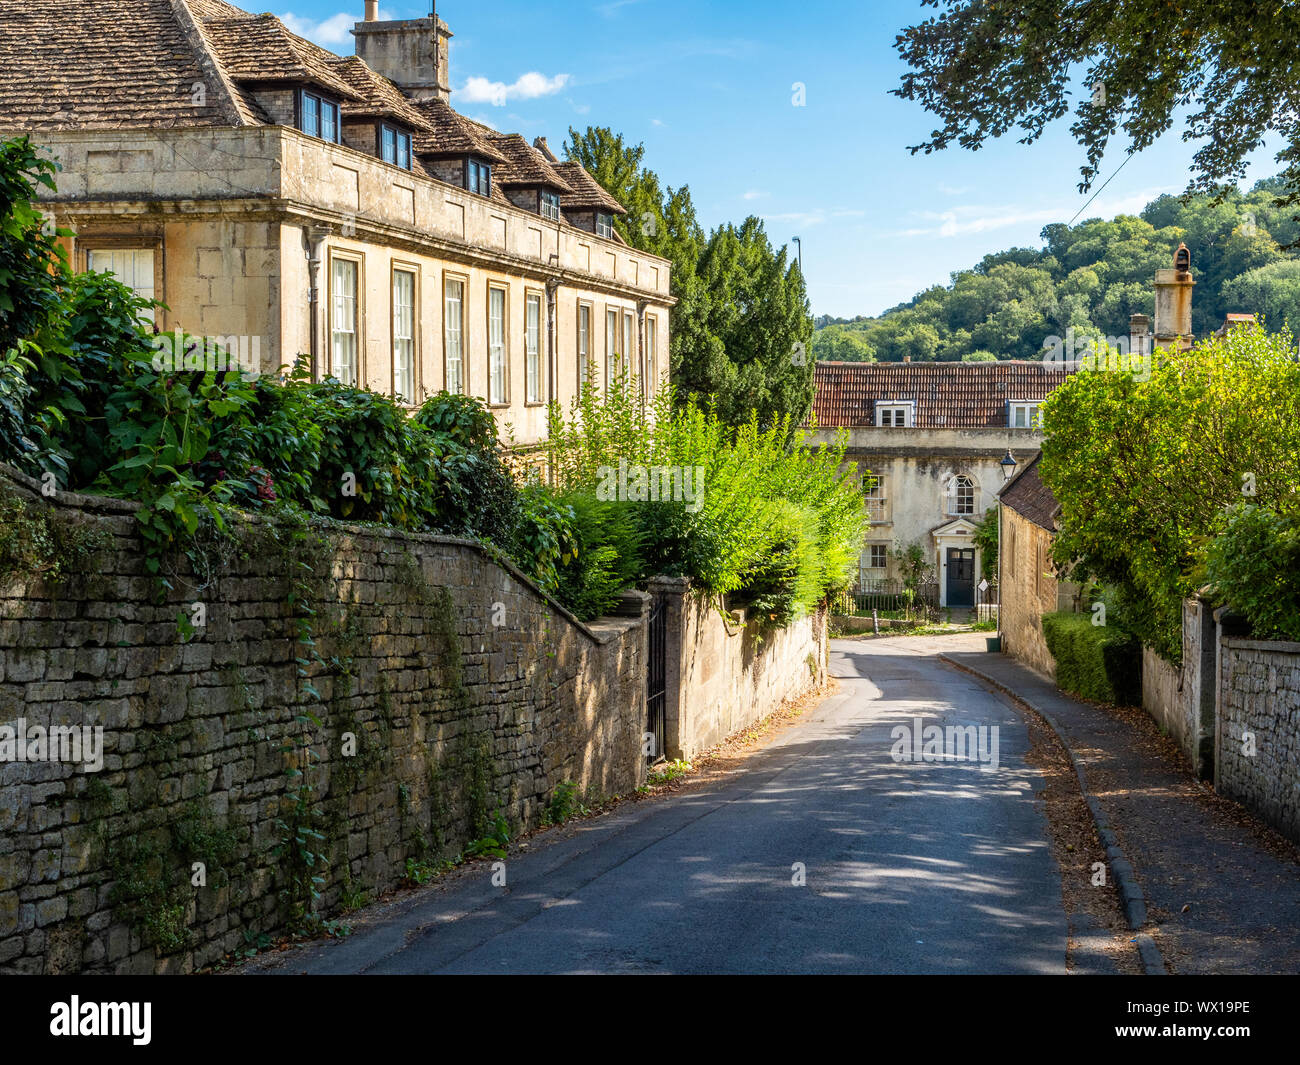 Small manor house and other grand buildings on a street in Freshford village near Bath in Somerset UK Stock Photo